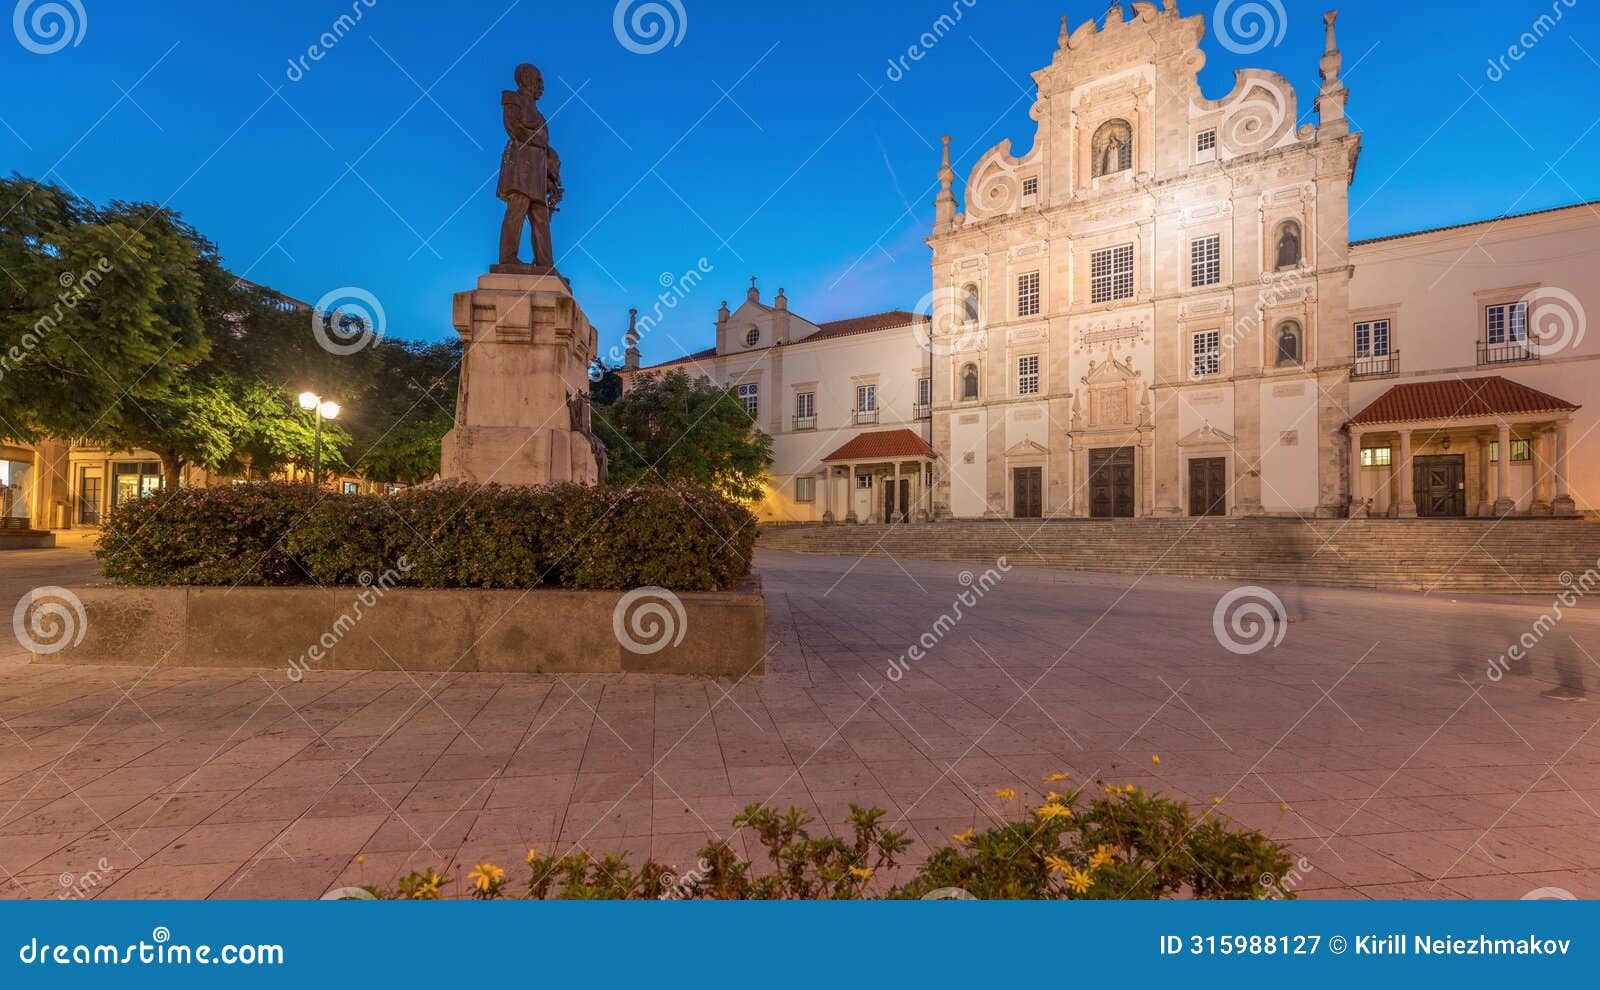 panorama showing sa da bandeira square with a view of the santarem see cathedral day to night timelapse. portugal